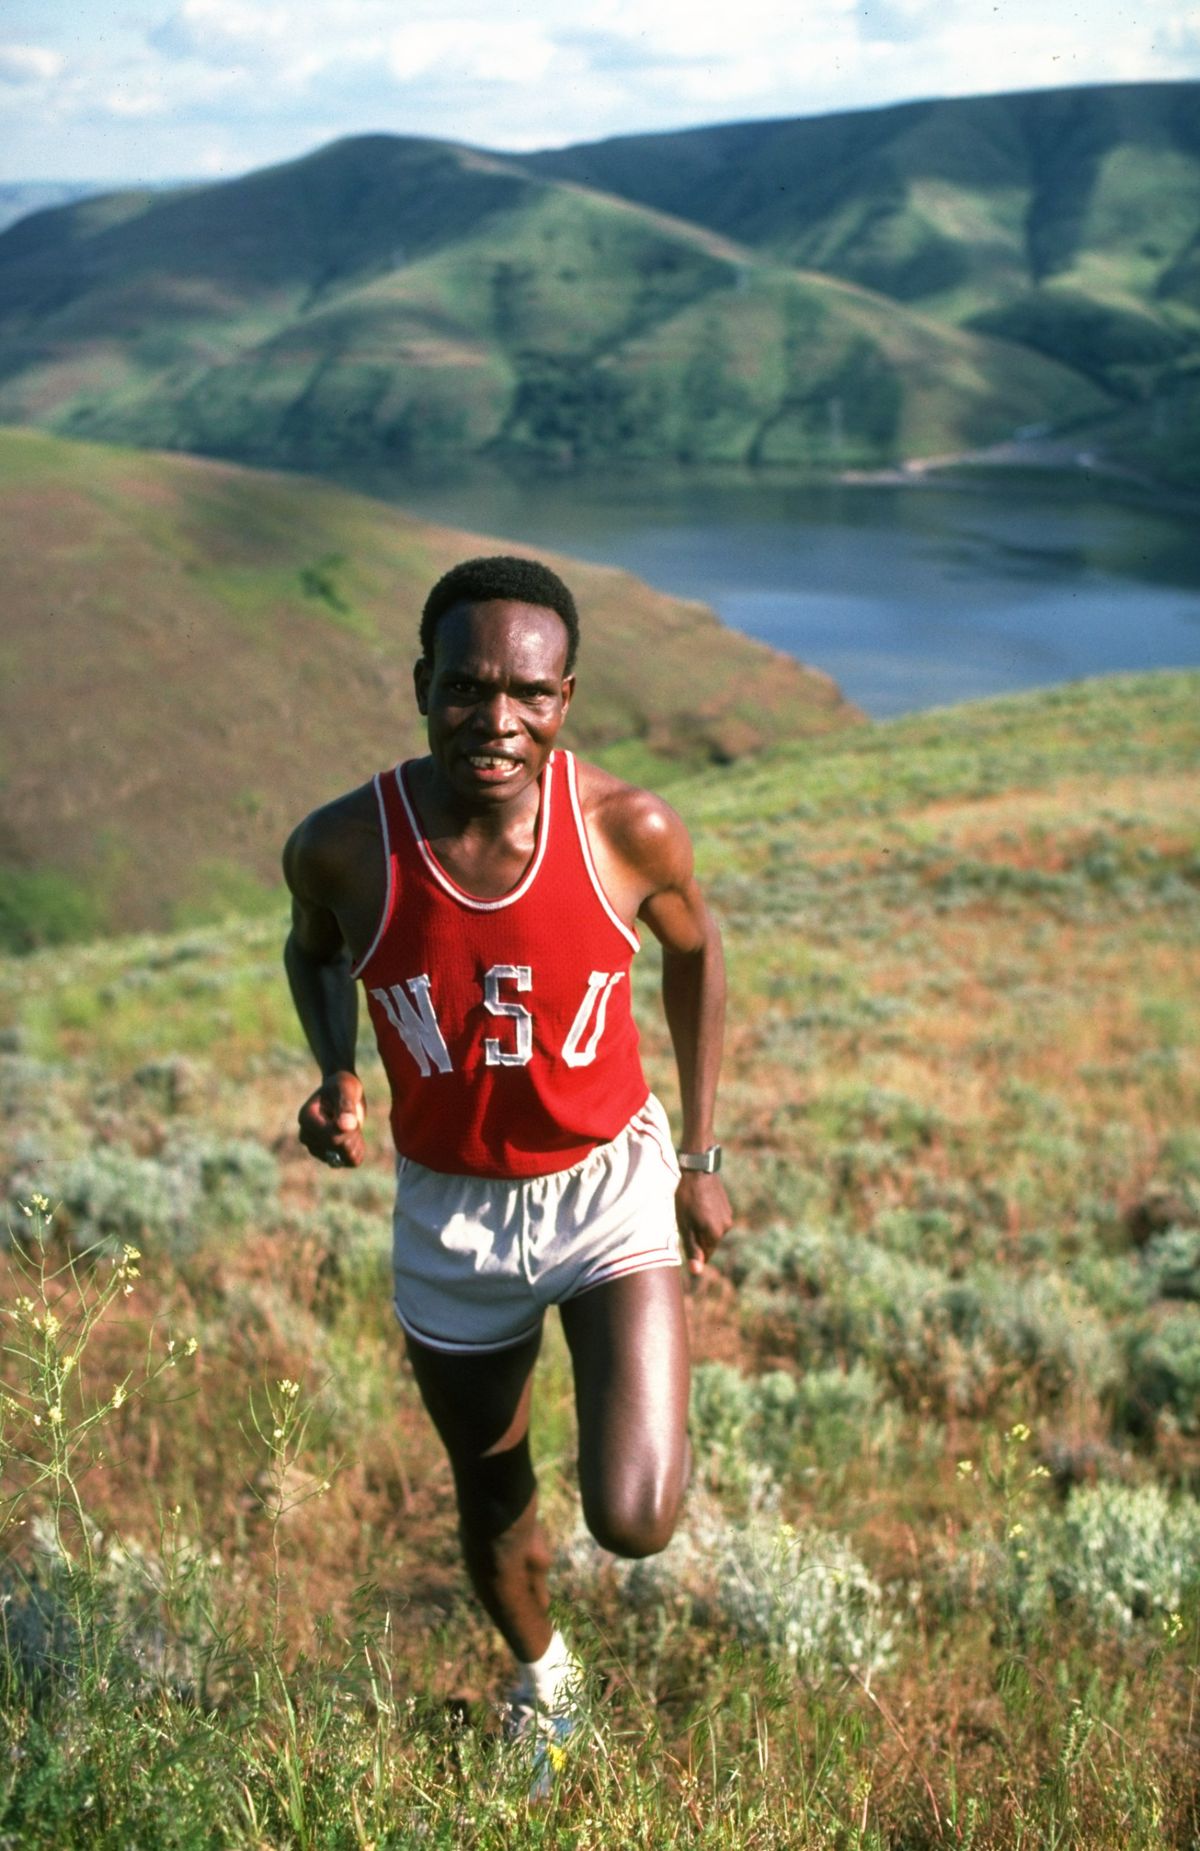 Henry Rono trains in the Snake River Canyon as a member of the Washington State track and field team in May 1978.  (Tony Duffy/Allsport)